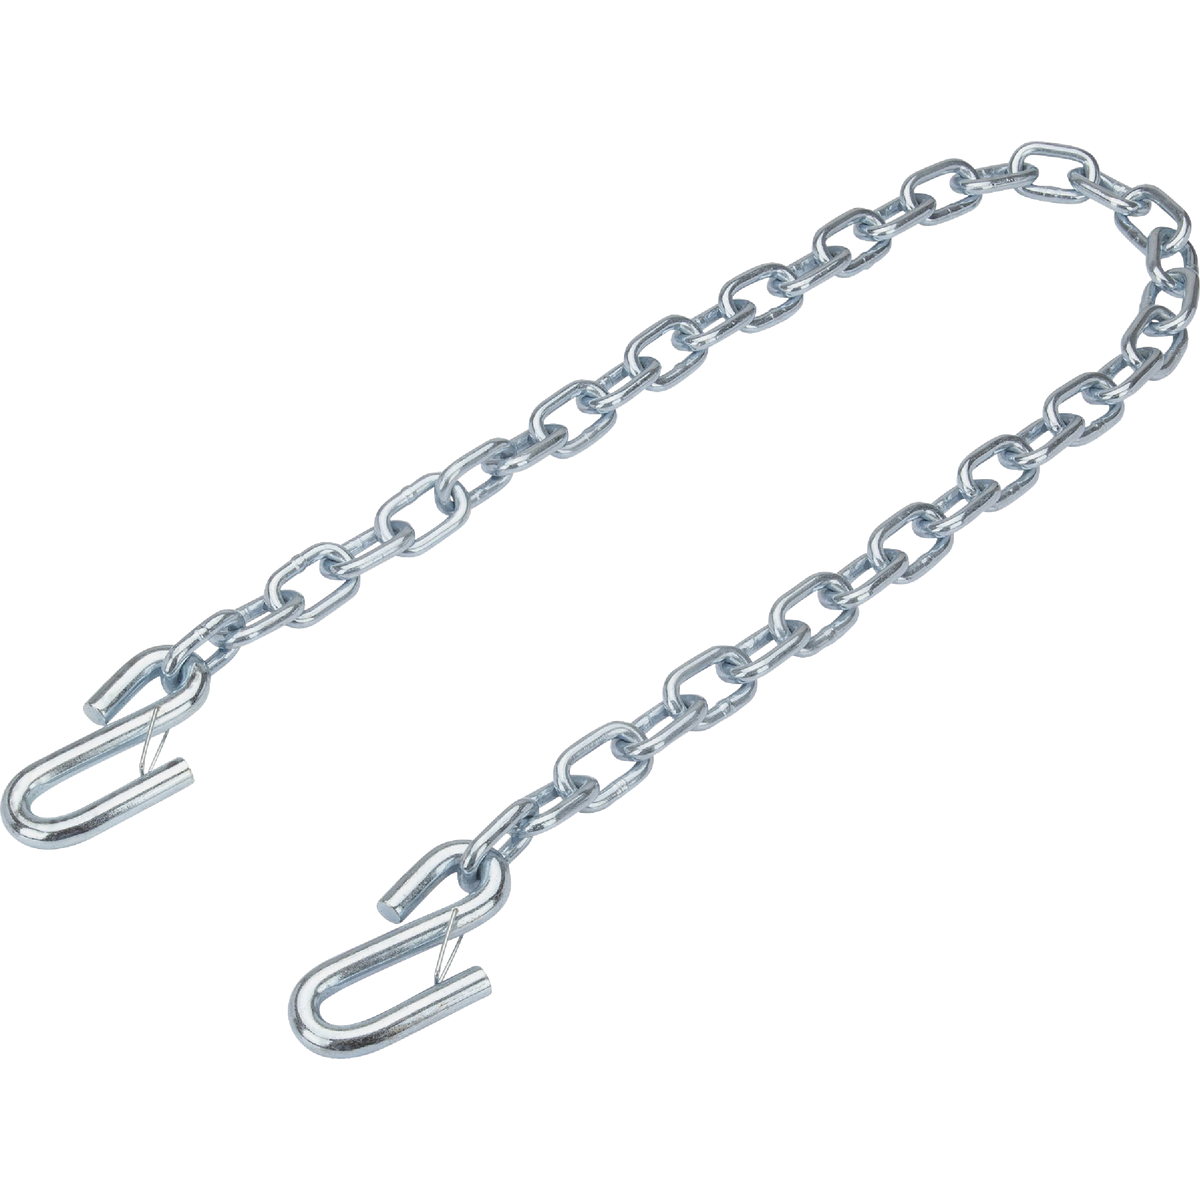 Tow Safety Chain